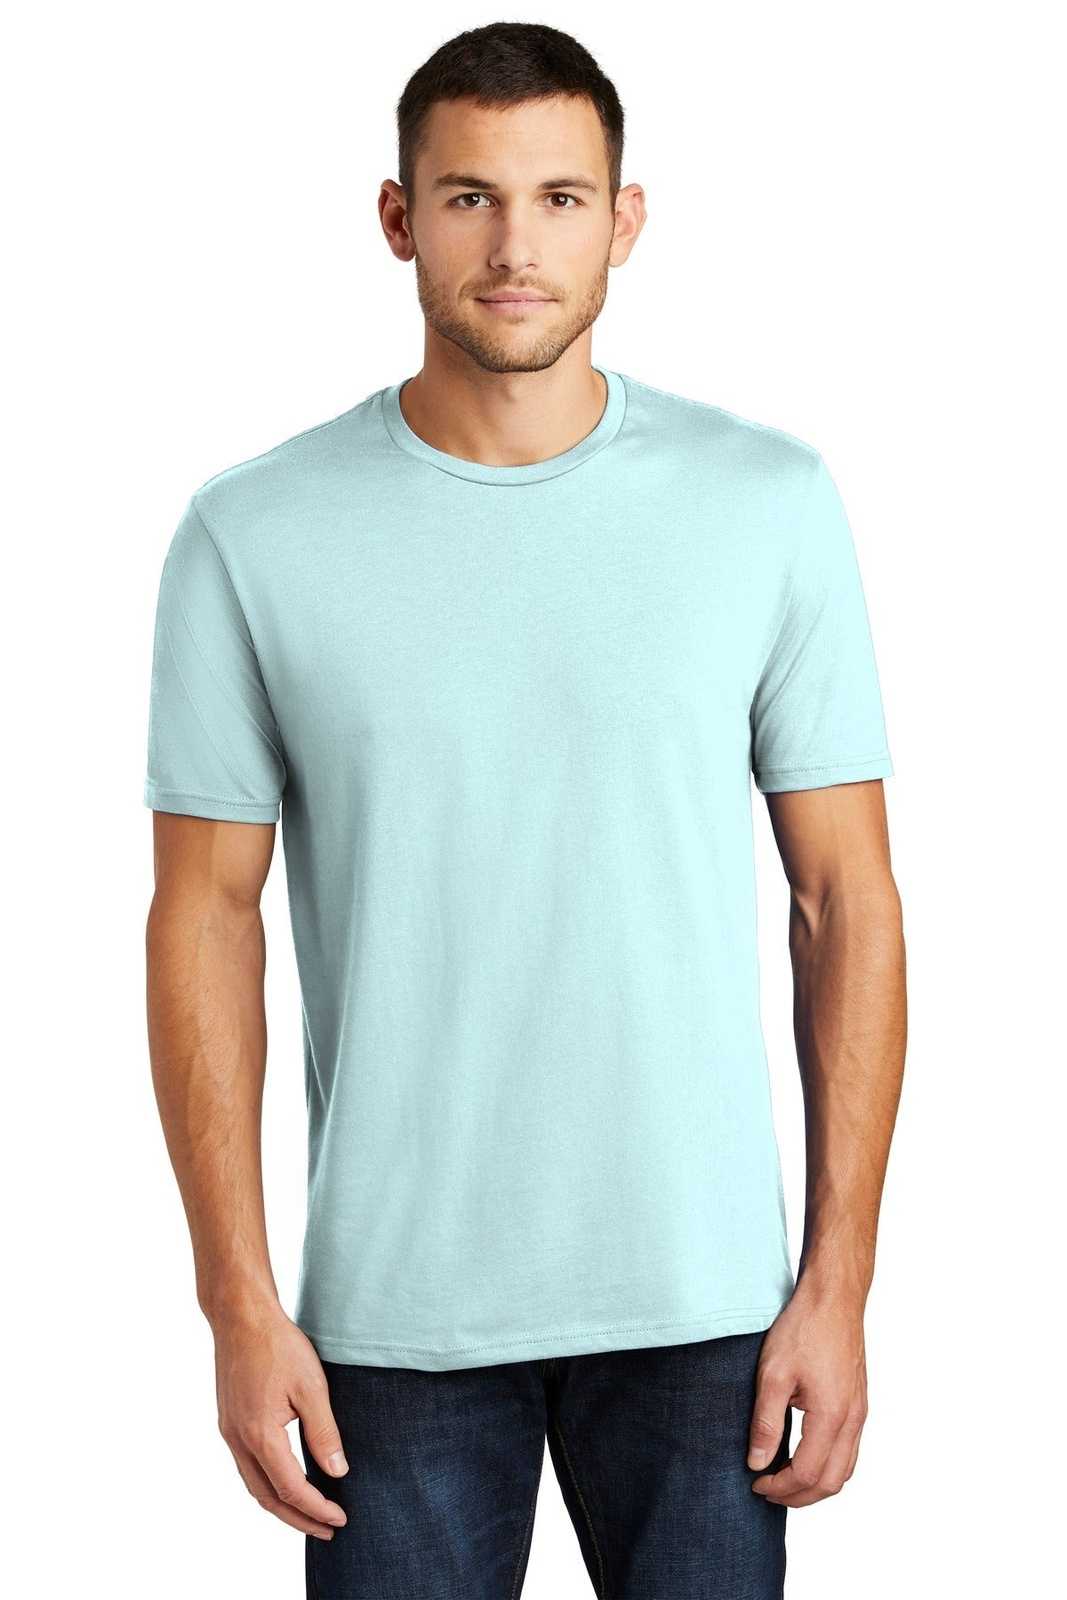 District DT104 Perfect Weight Tee - Seaglass Blue - HIT a Double - 1